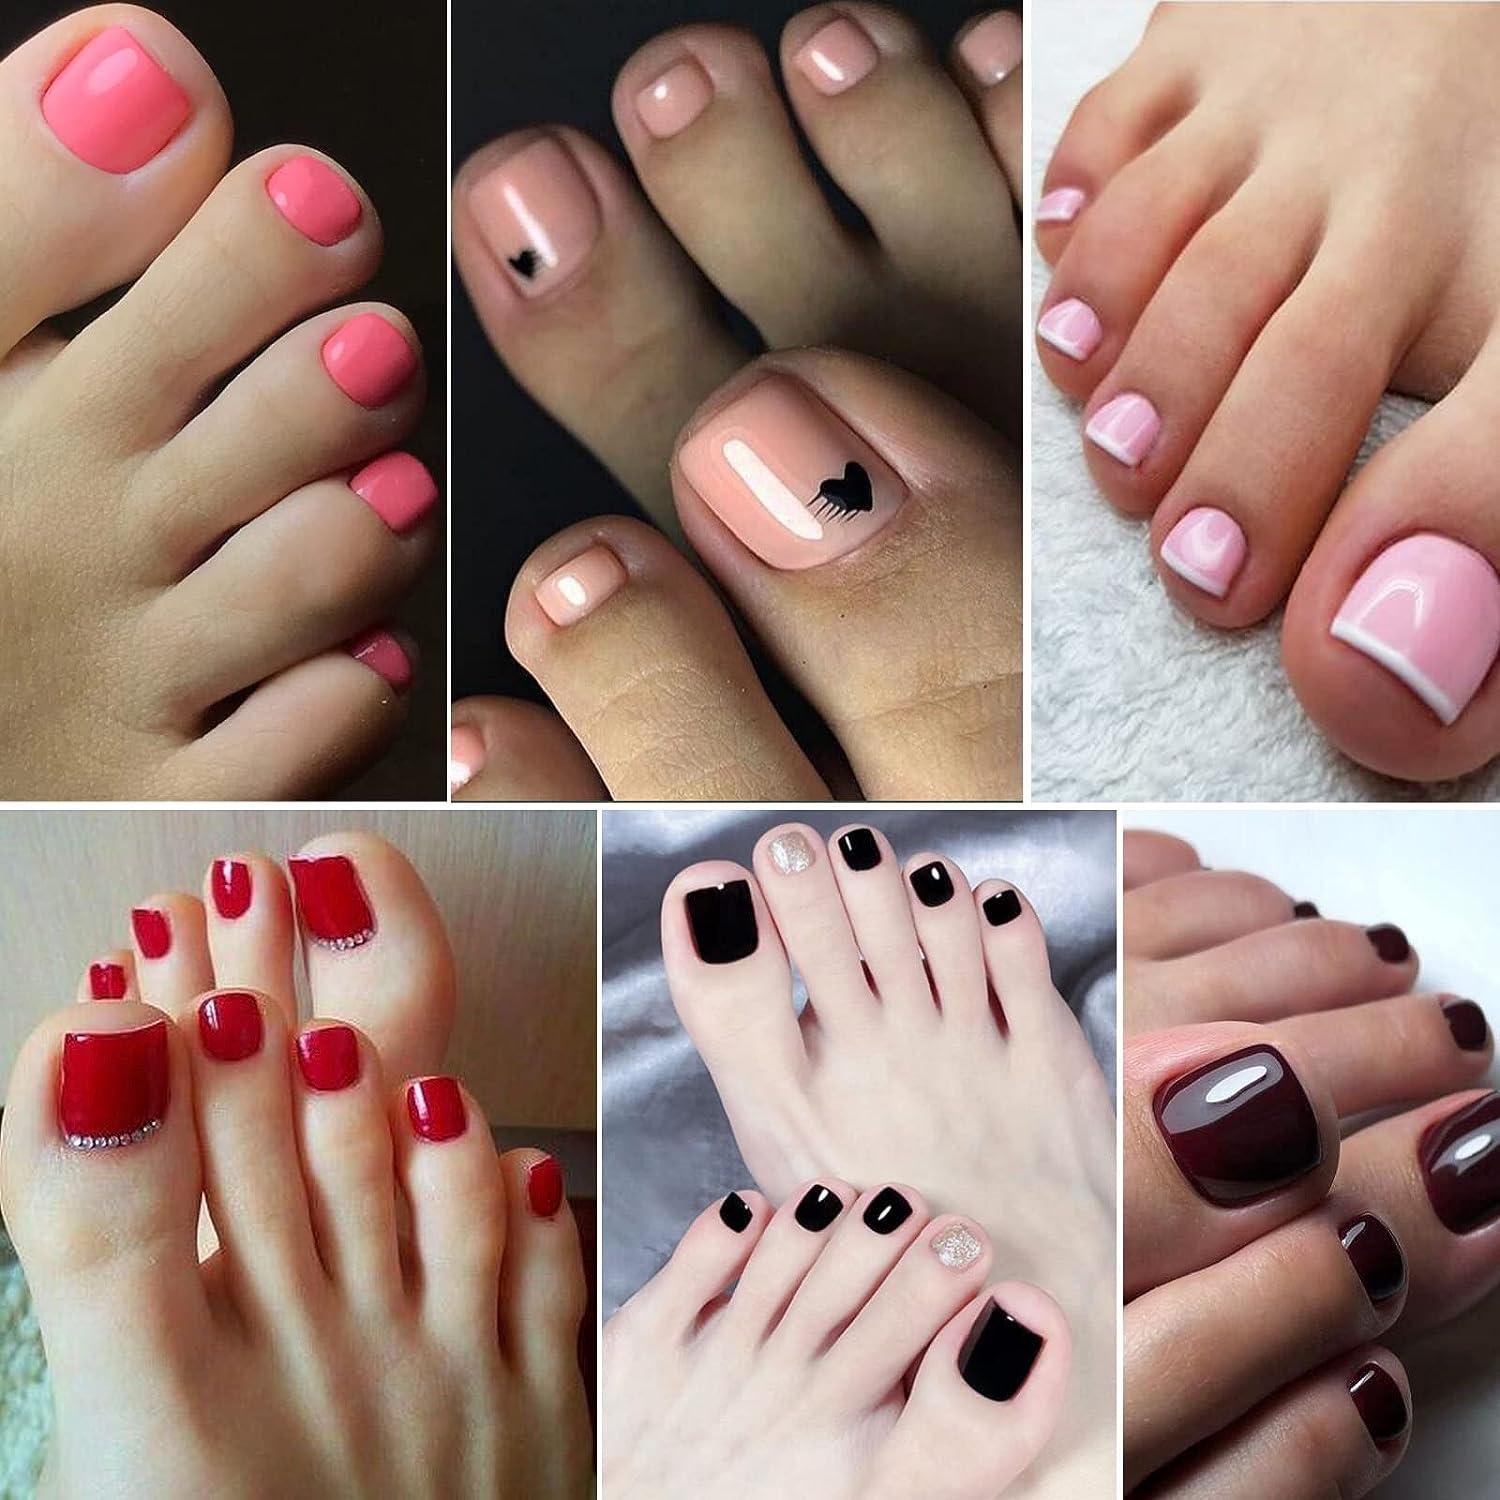 Top Nail Studio For Women services in Bangalore, India at your home